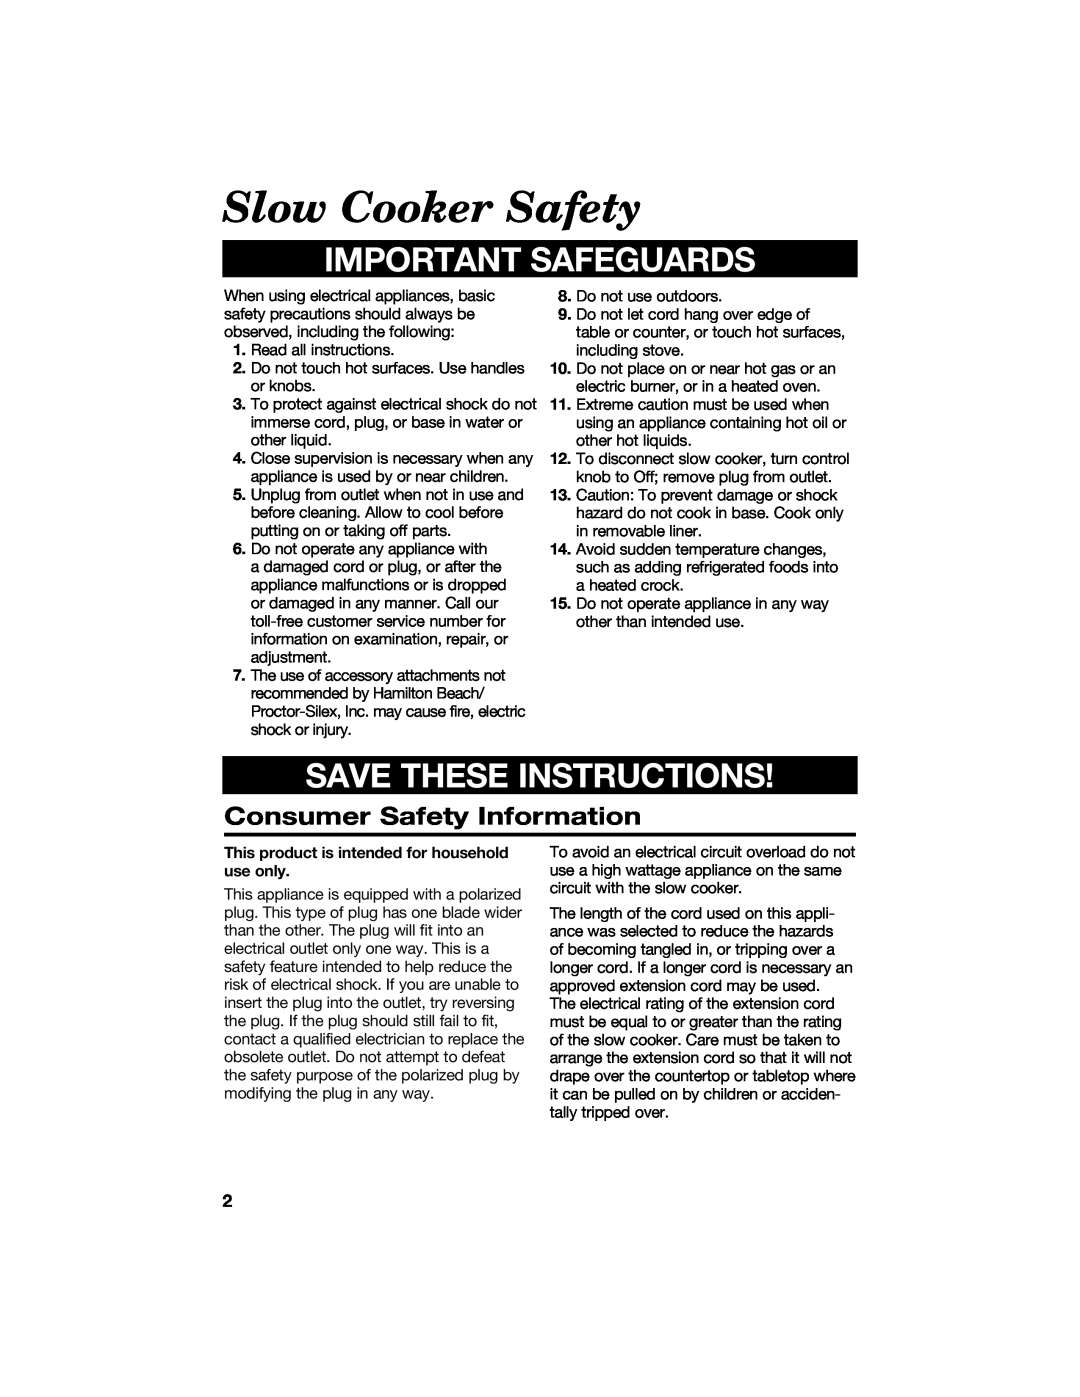 Hamilton Beach 840084500 Slow Cooker Safety, Consumer Safety Information, Important Safeguards, Save These Instructions 